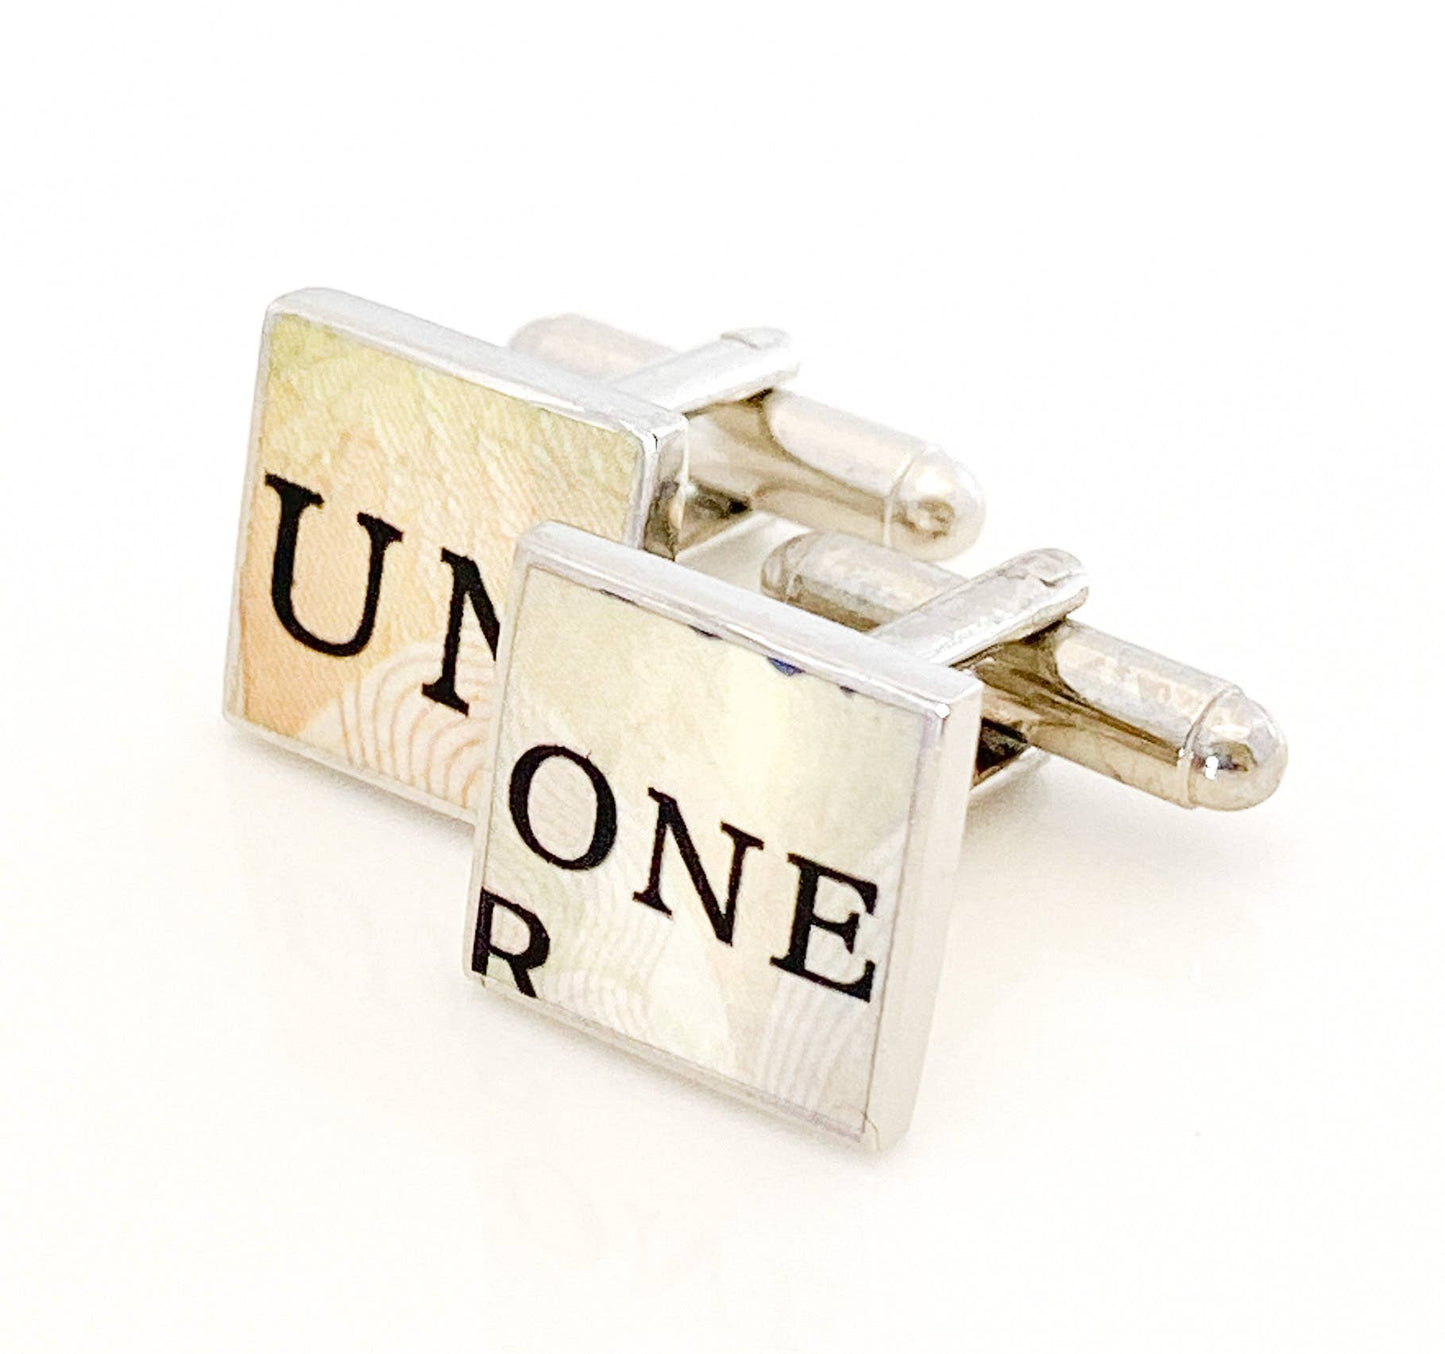 Load image into Gallery viewer, Square cufflinks with UN and ONE from Canadian dollar bill
